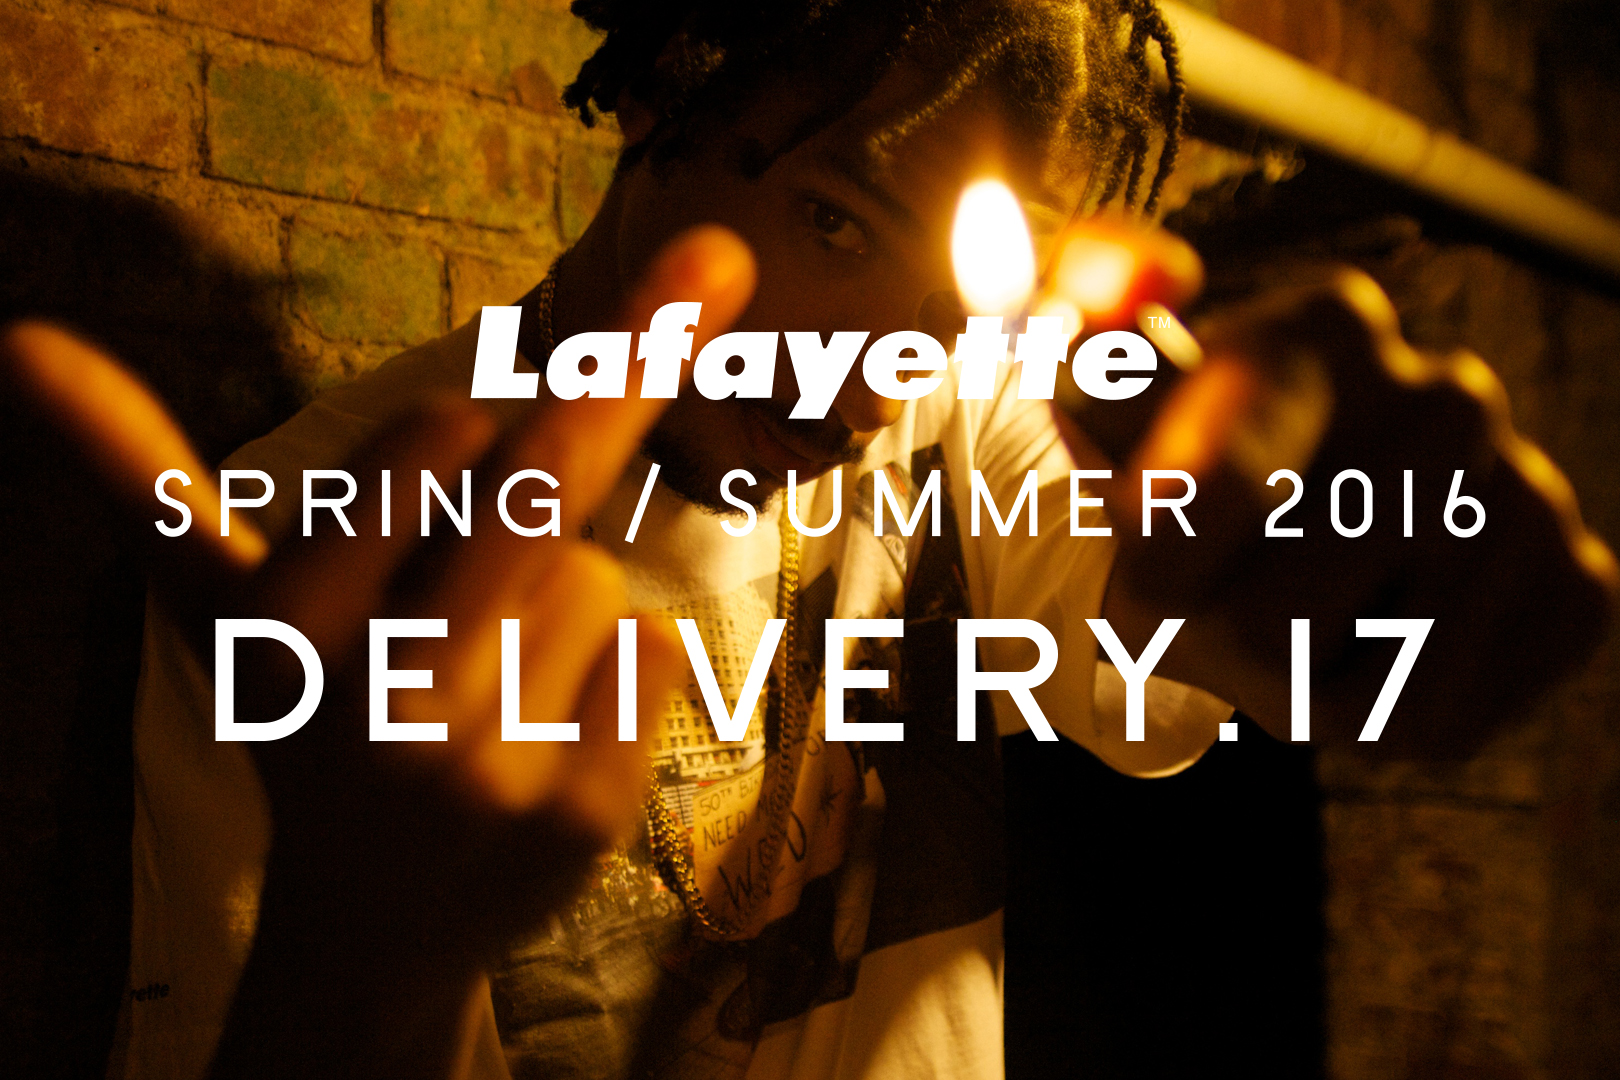 Lafayette Spring/Summer Collection 2016 DELIVERY.17